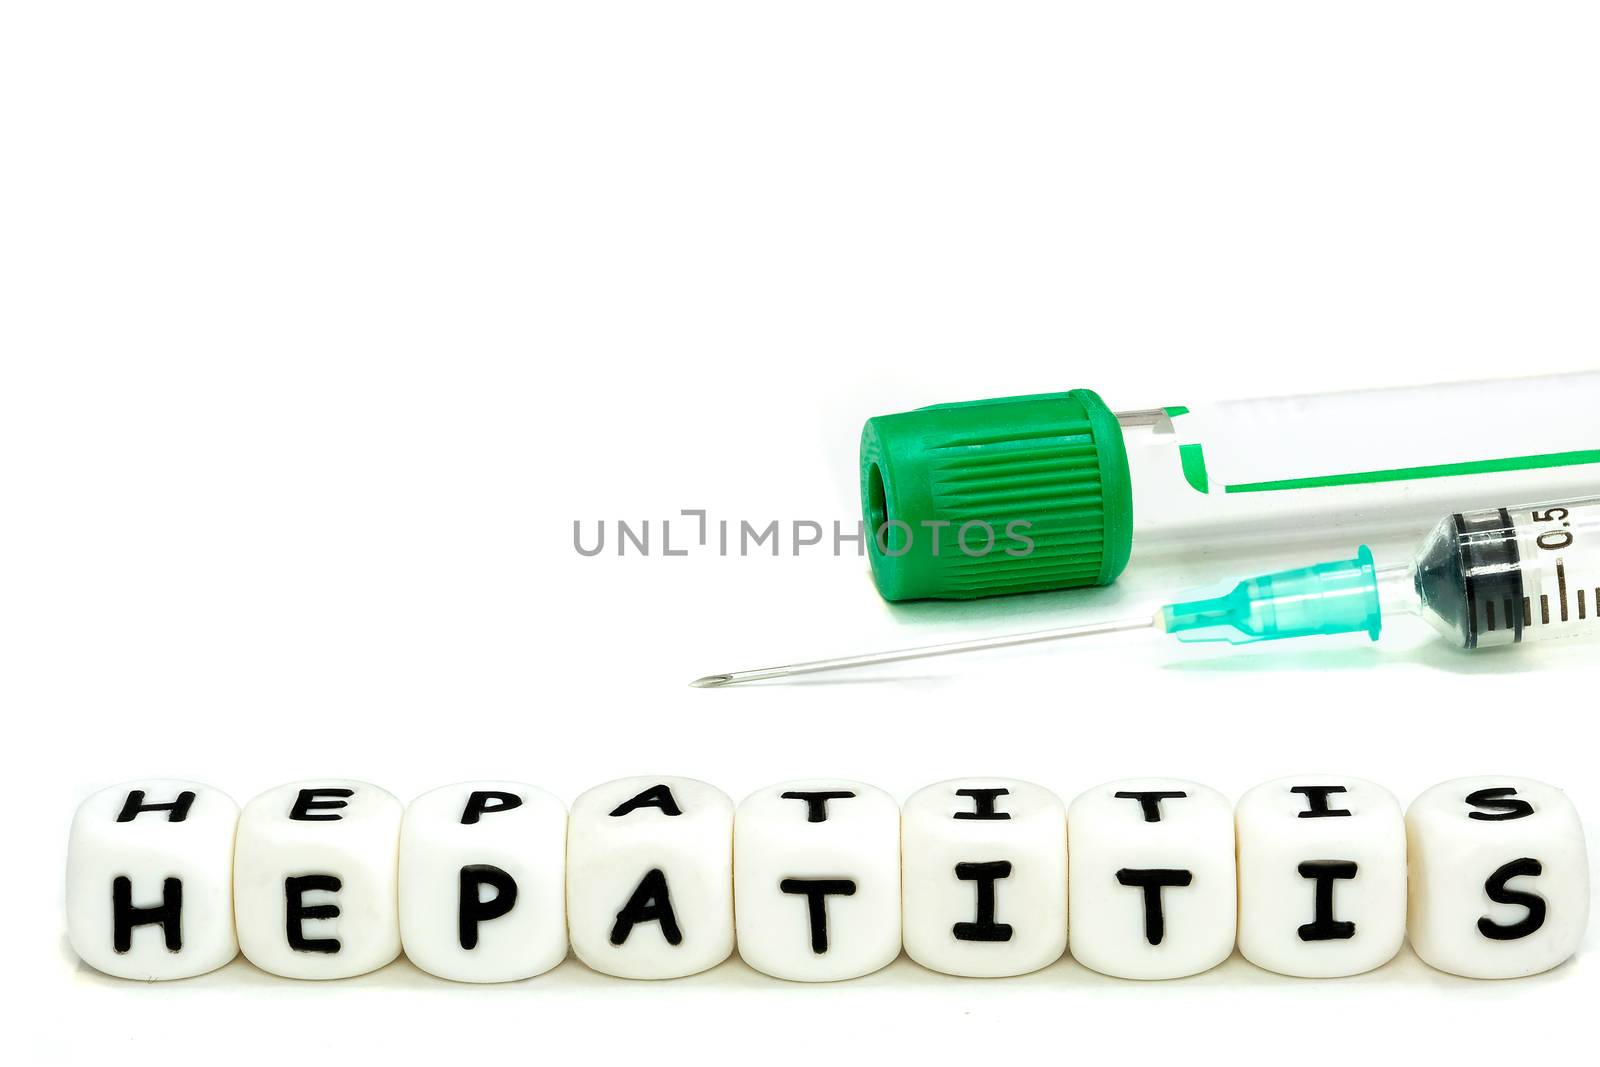 A laboratory test tube and a syringe for blood sampling in the patient. The alphabet letters hepatitis emphasize the awareness of this serious condition. Macro image on white background.